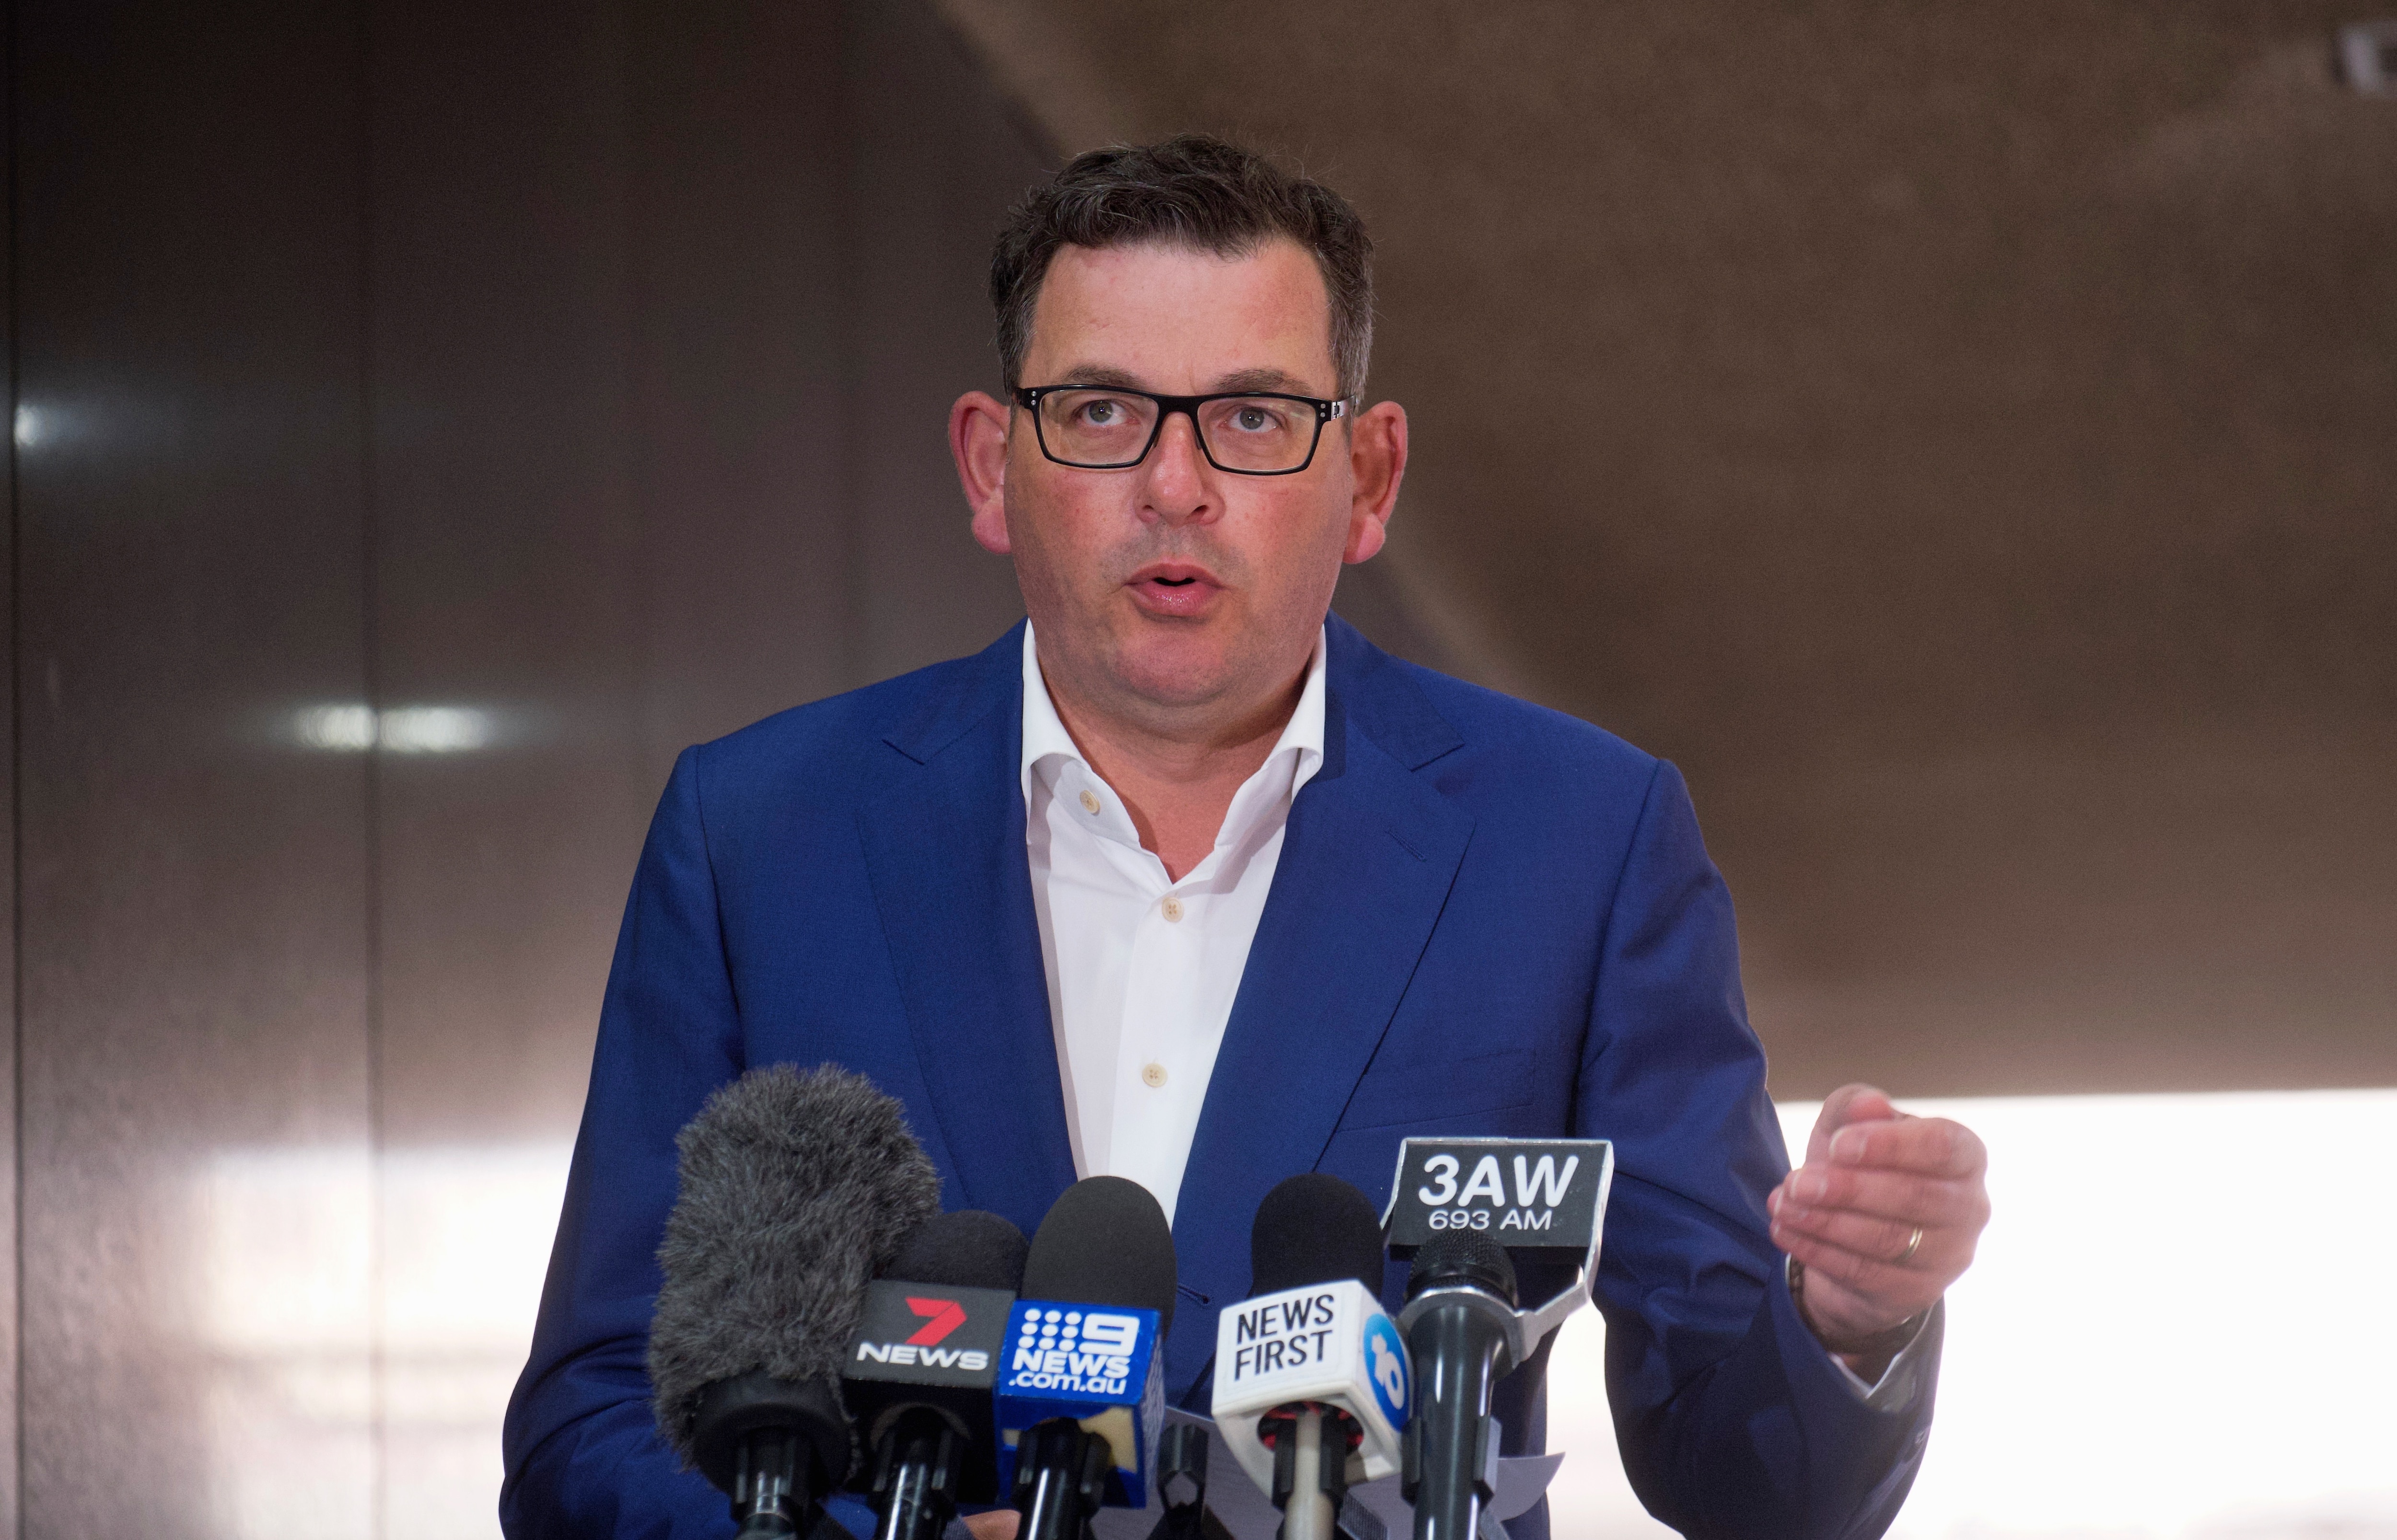 Victorian Premier Daniel Andrews said he is "sorry" IVF services have been impacted.